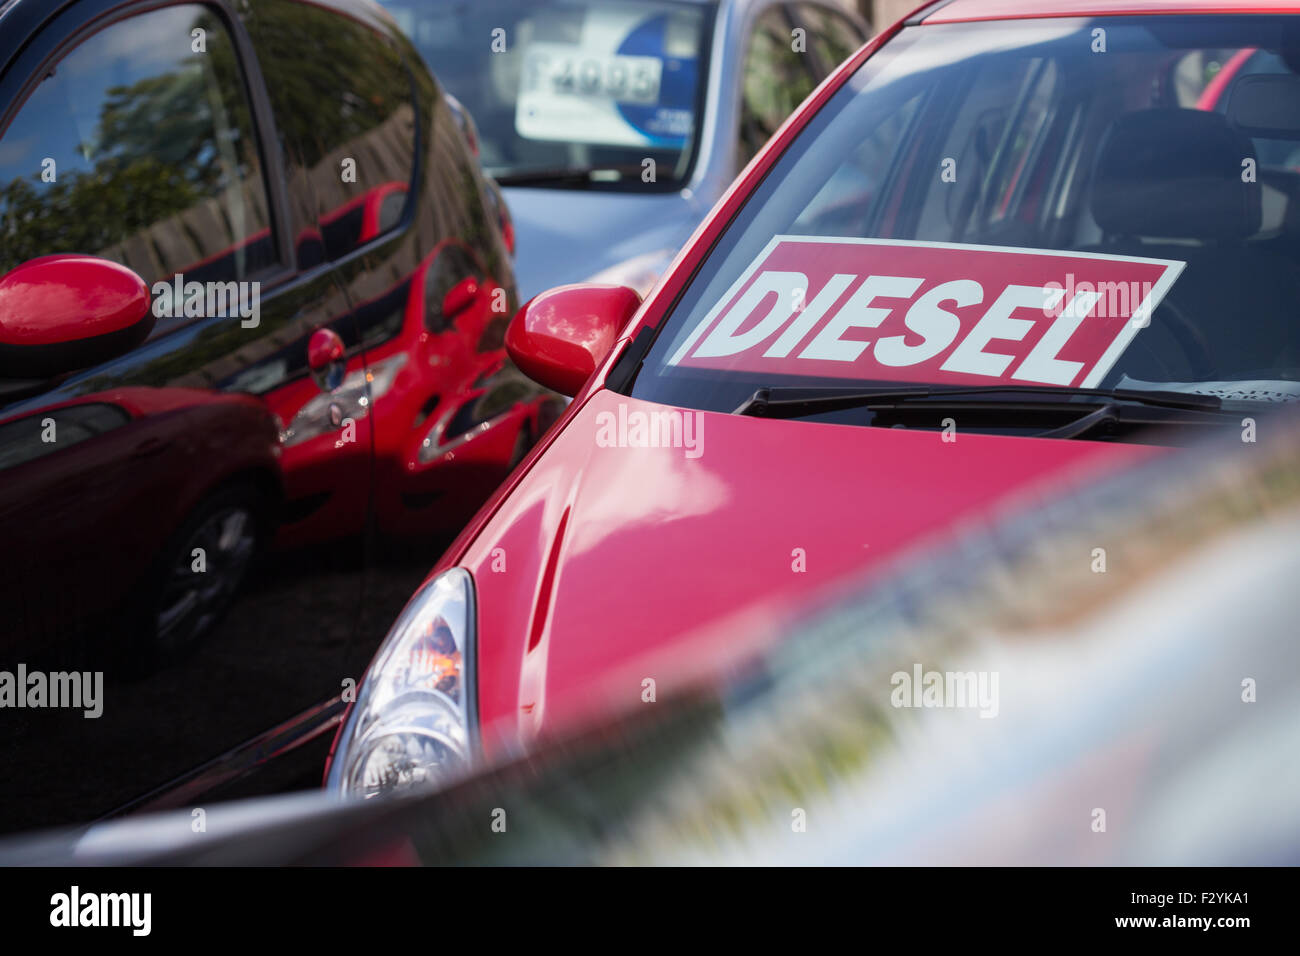 diesel sign in window of for sale car Stock Photo